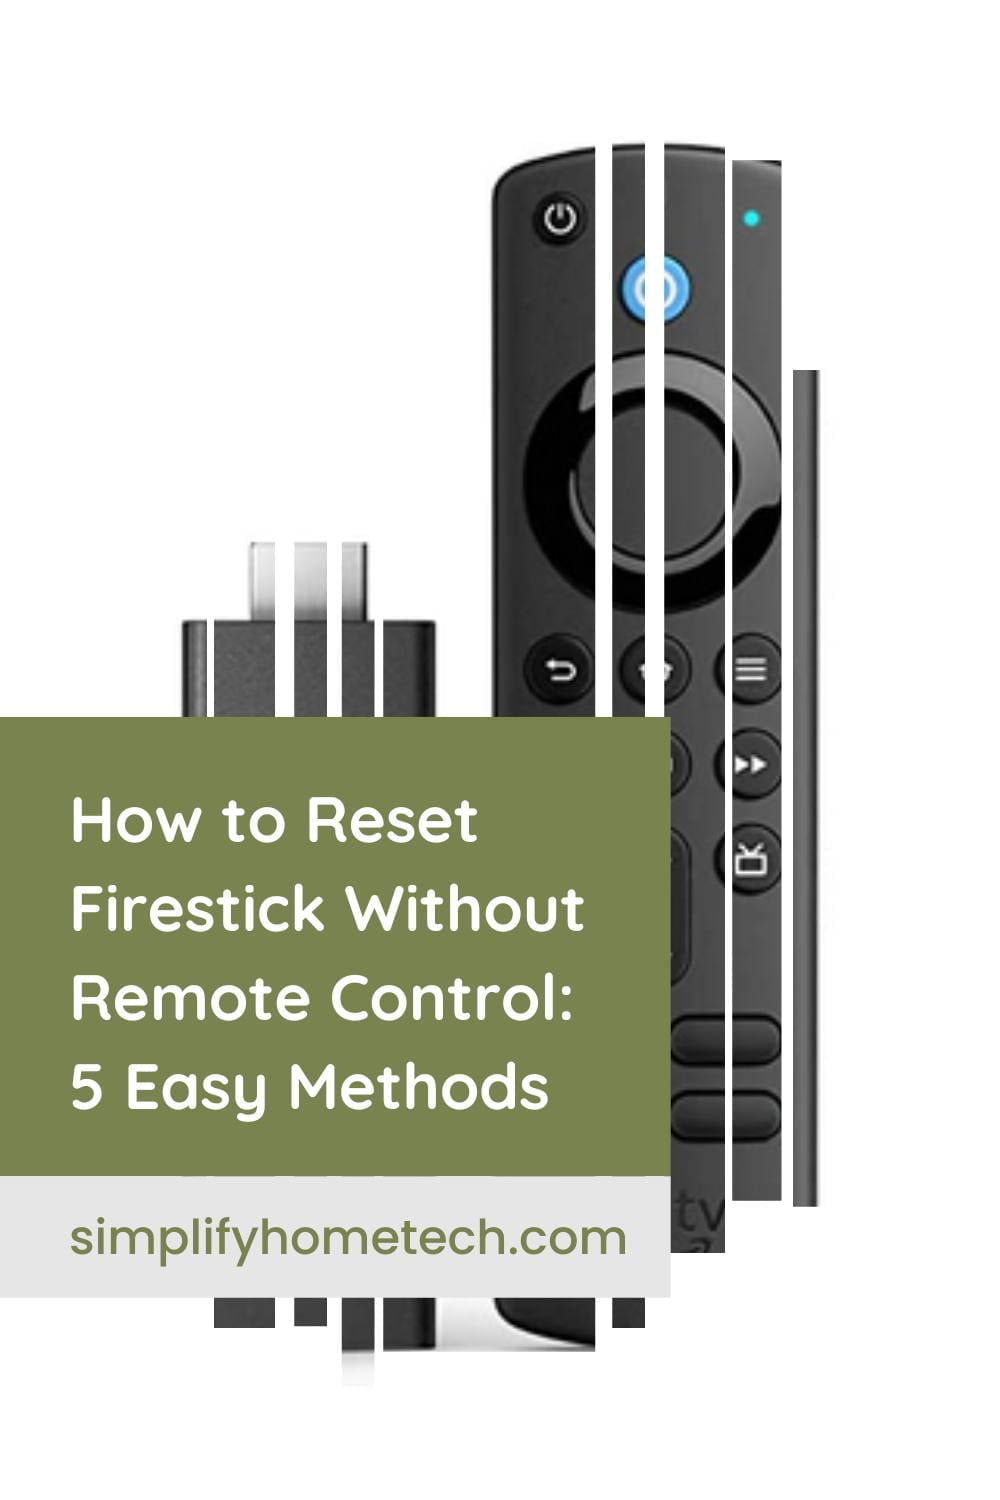 How to Reset Firestick Without Remote Control